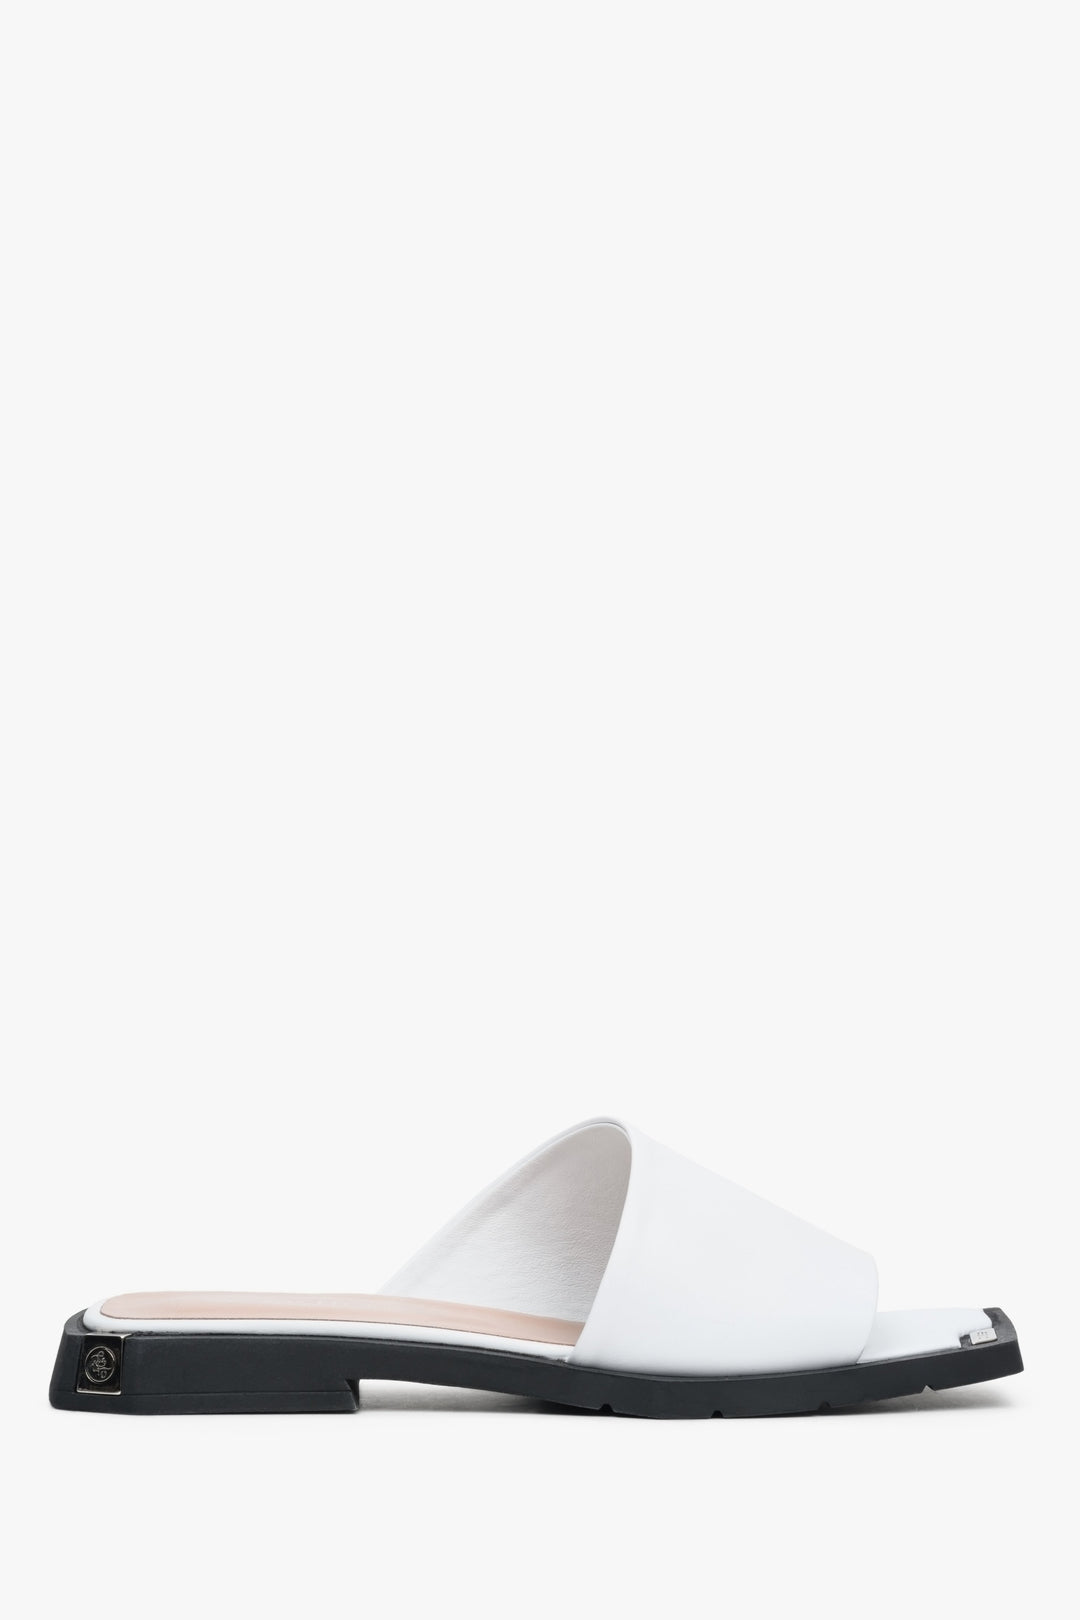 Women's flat mules for summer in white color Estro made of natural leather - presentation of the tip and sideline of the shoes.